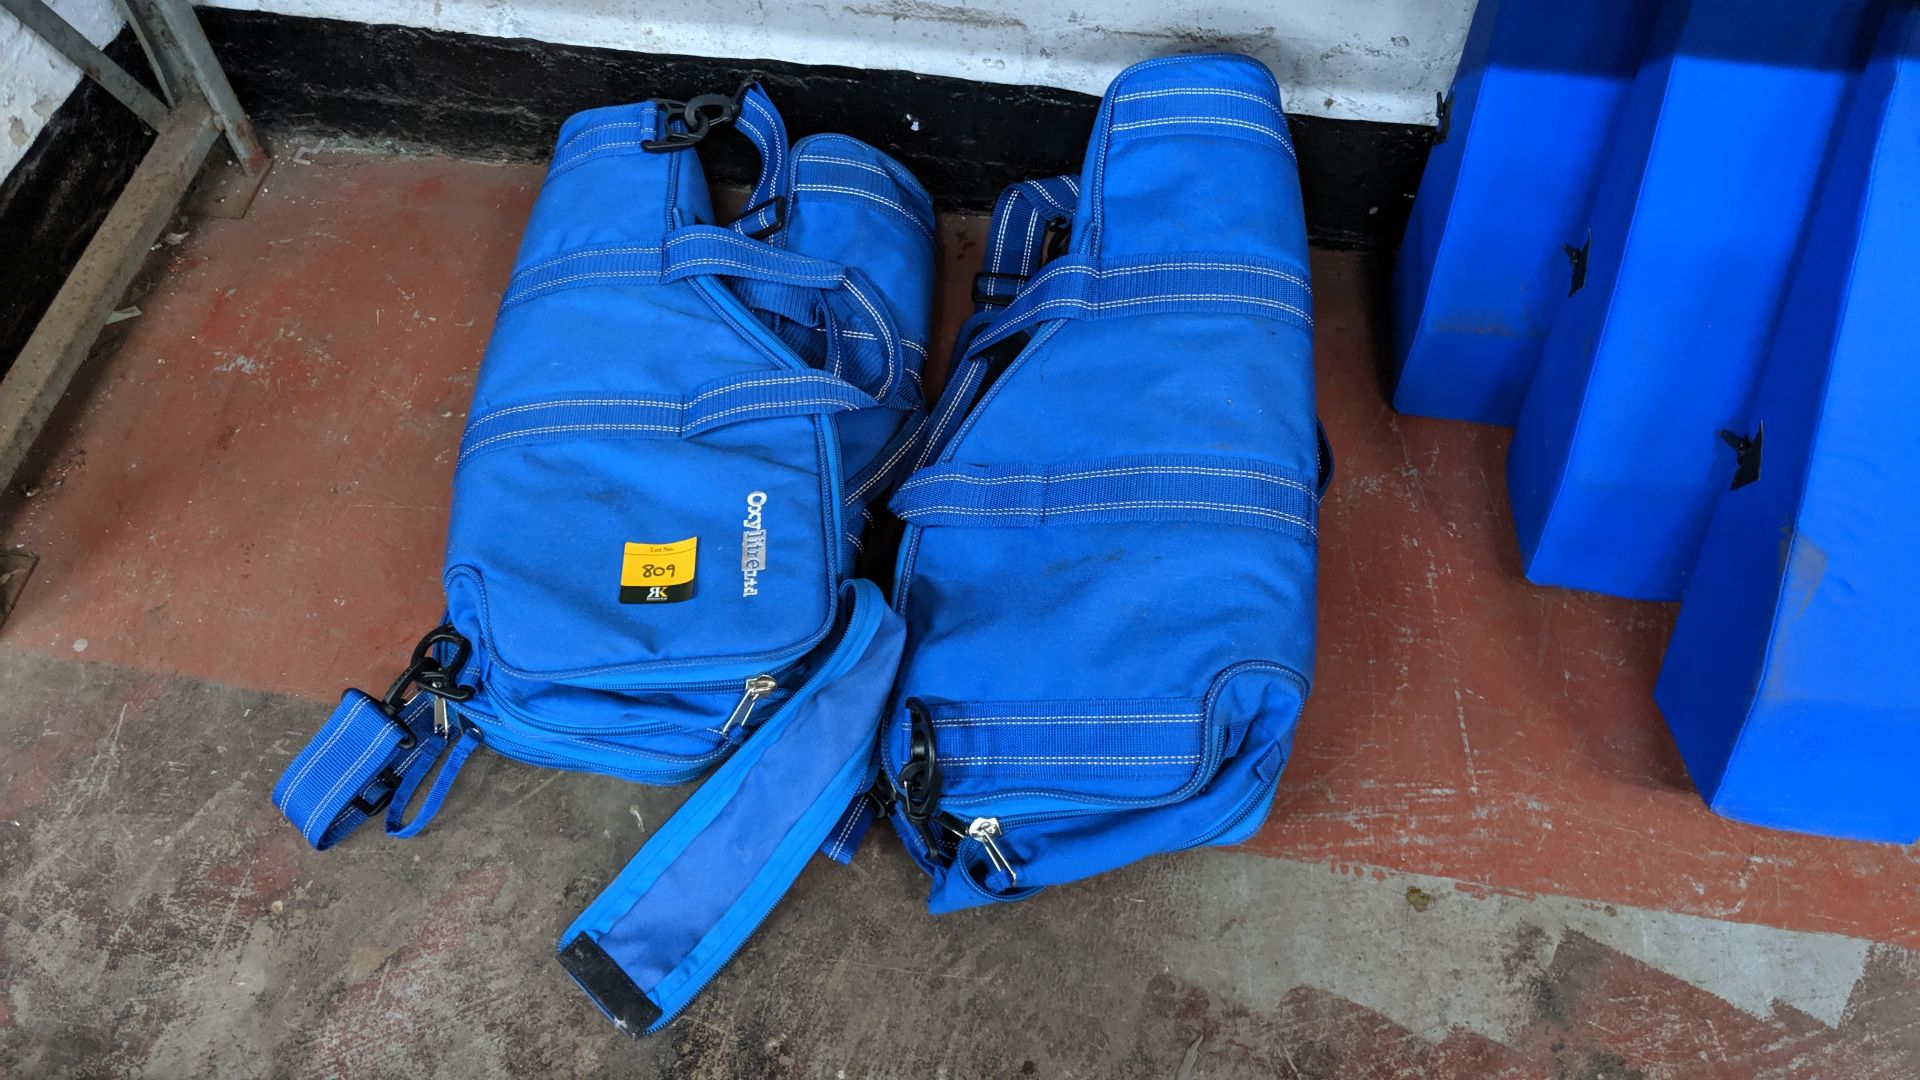 4 off Oxylitre Ltd carry bags. This is one of a large number of lots used/owned by One To One (North - Image 5 of 5